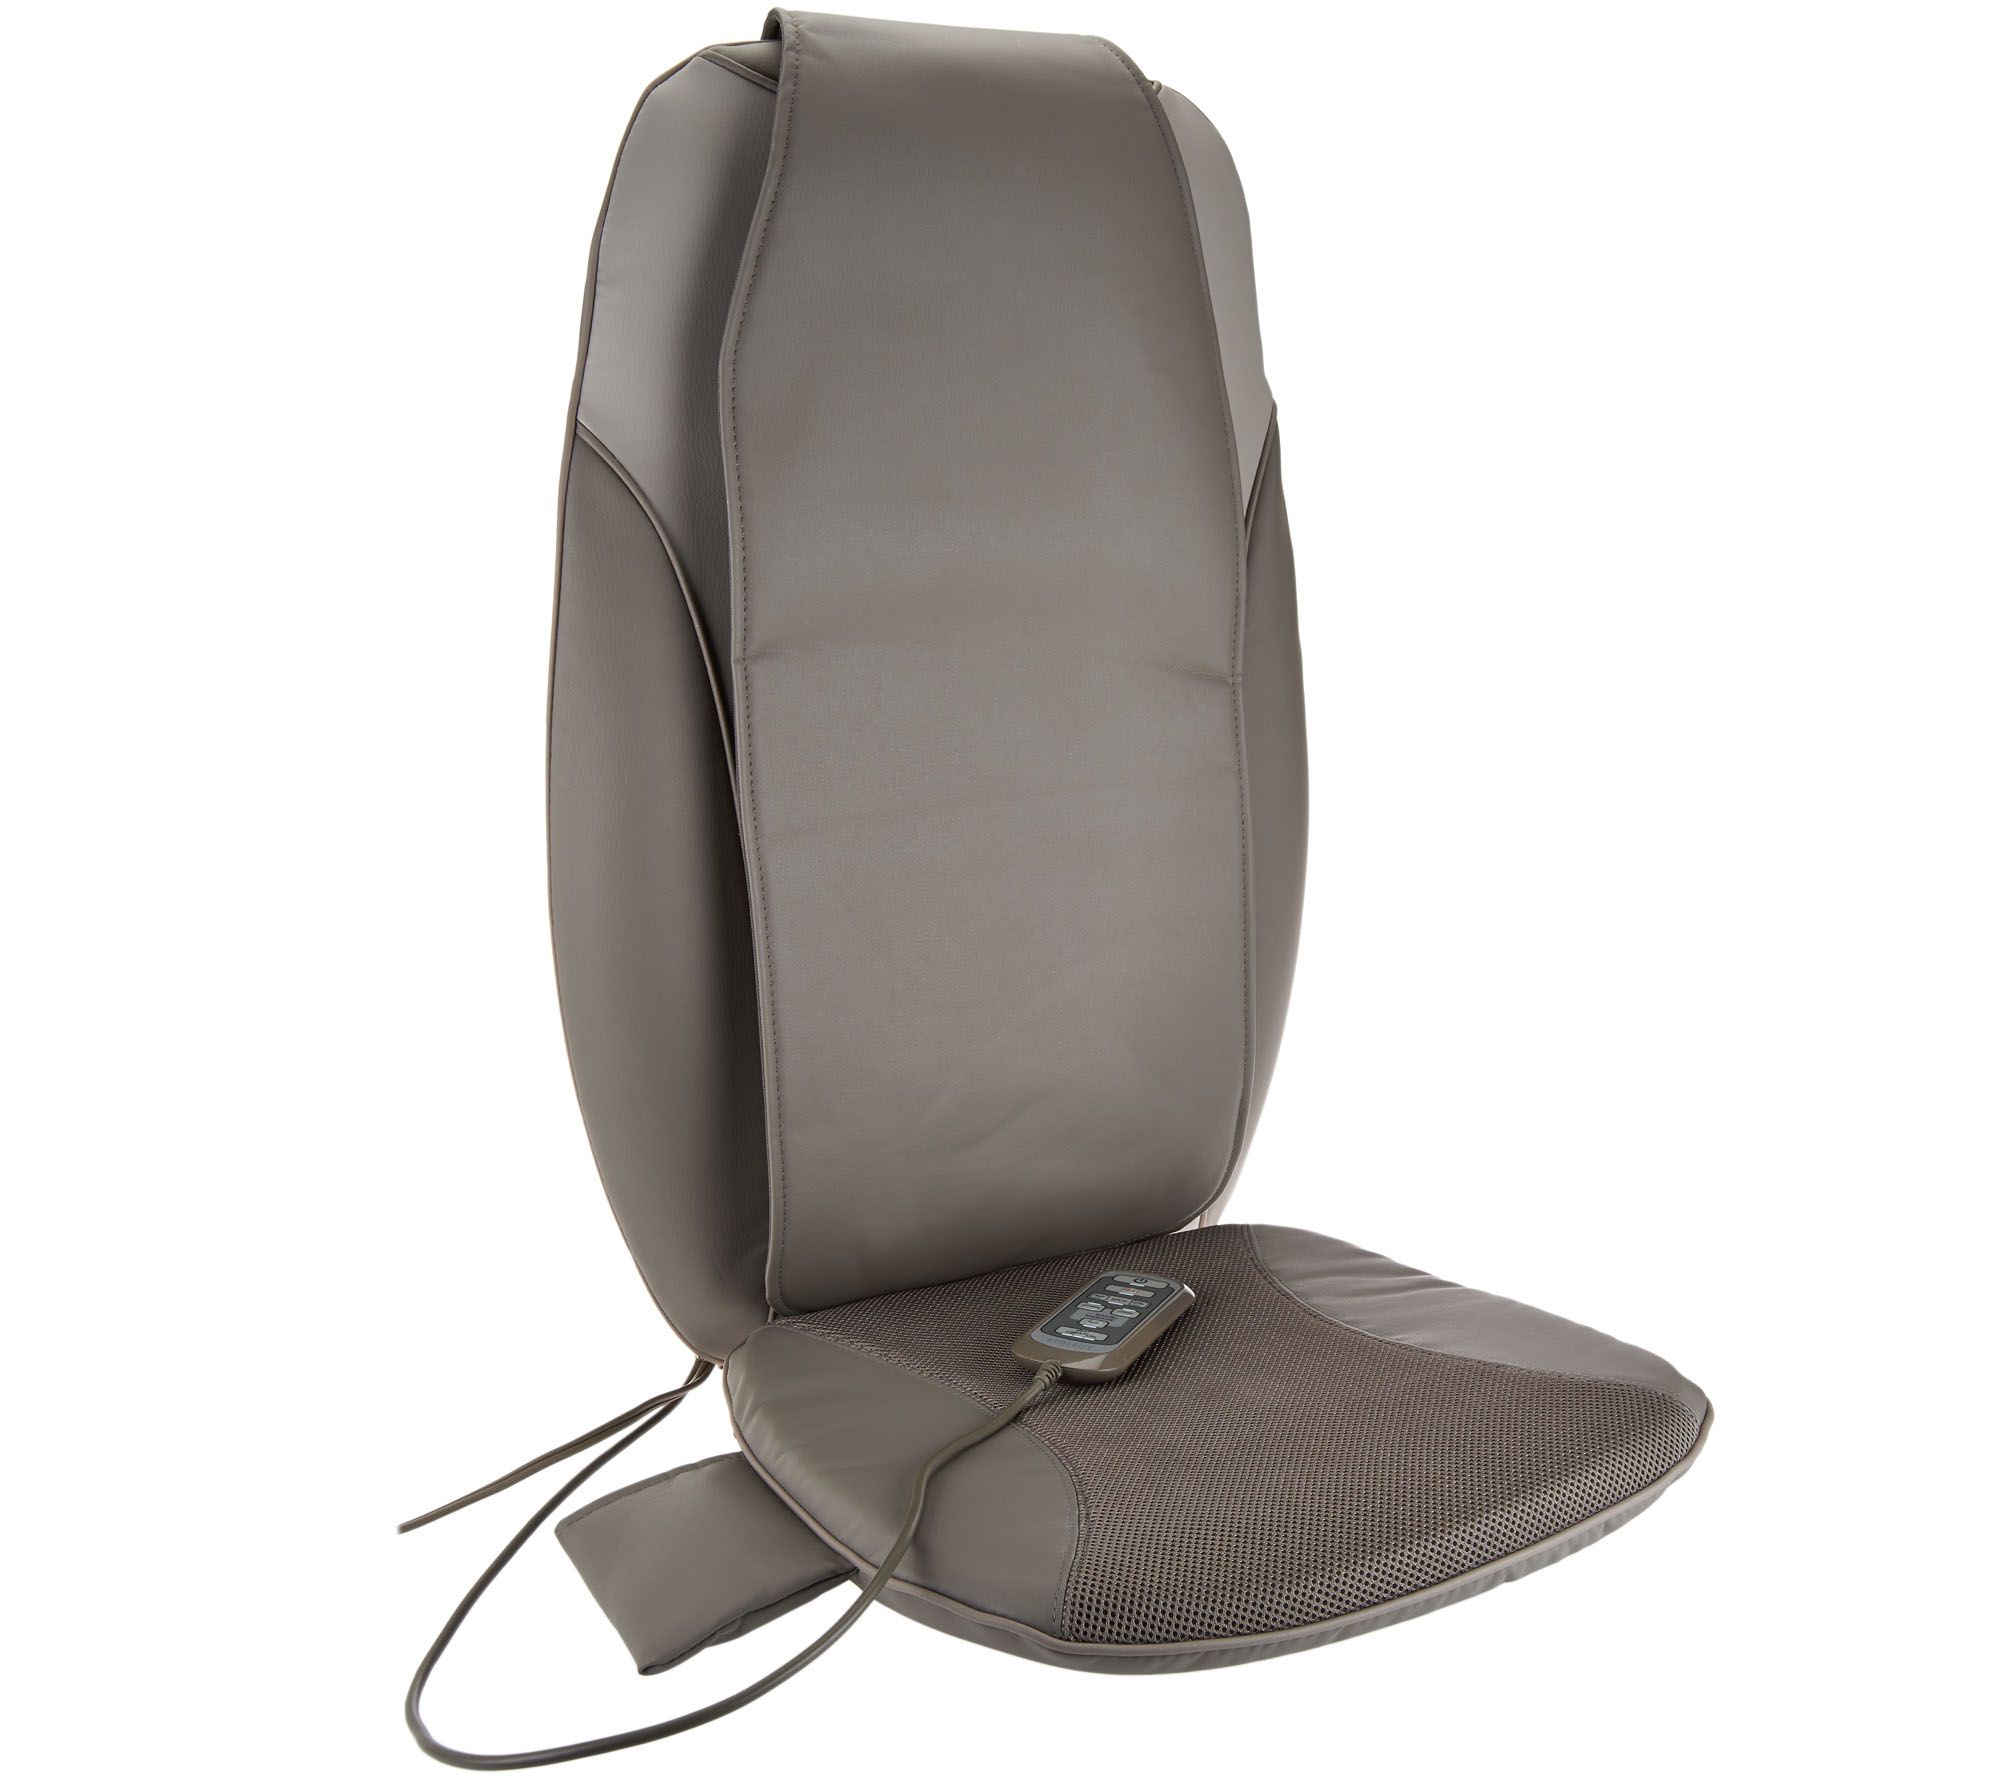 Homedics 2-in-1 Shiatsu Massaging Seat Topper with Removable